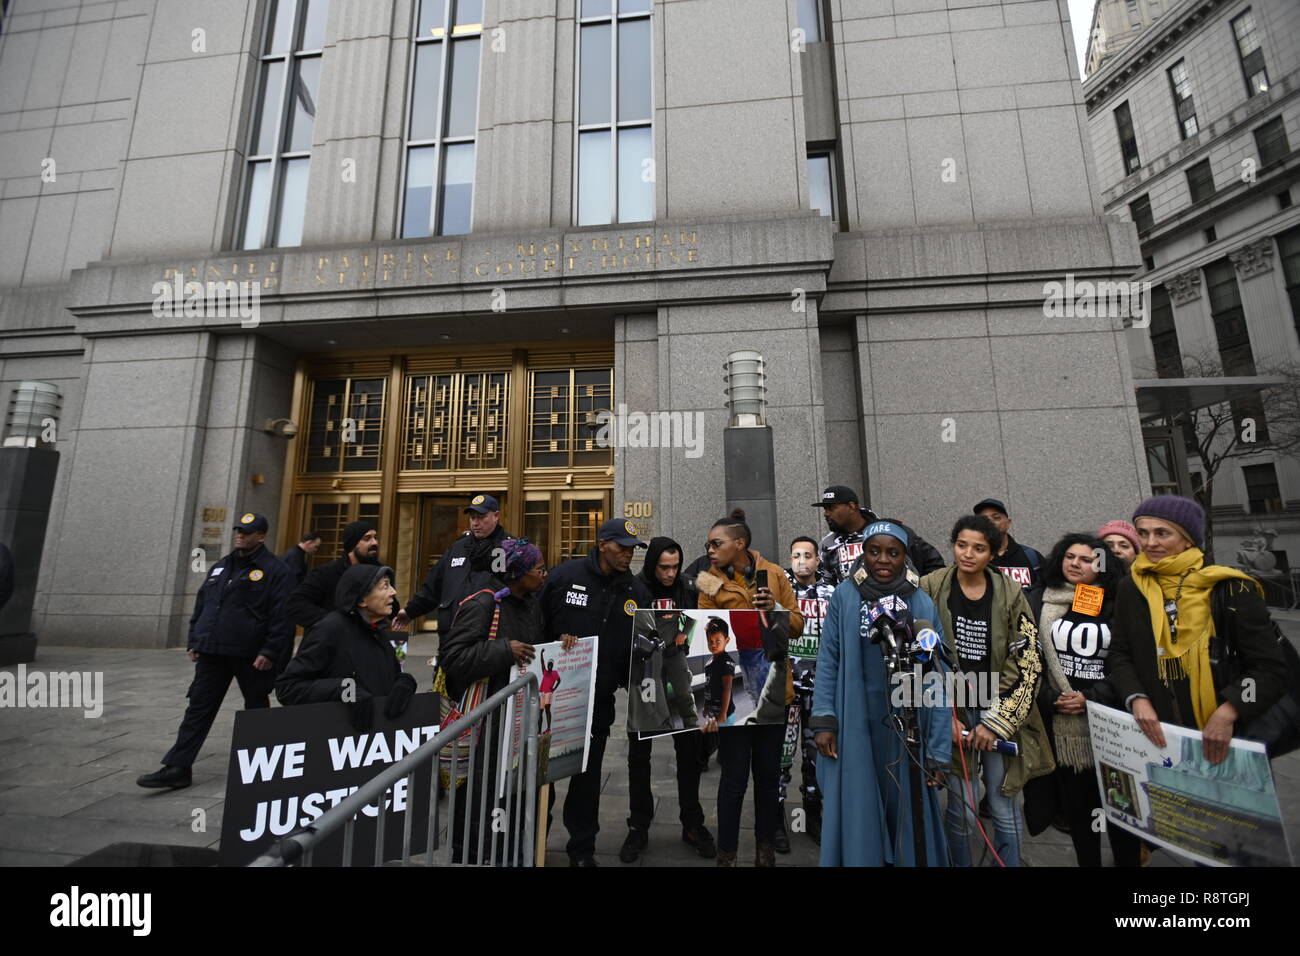 New York, USA. 17th Dec, 2018. New York, U.S., 17 December 2018 Statue of Liberty climber Patricia Okoumou speaks outside federal court following her conviction by a federal magistrate judge on misdemeanor charges of trespassing, disorderly conduct, and interfering with the functioning of government for her act of civil disobedience on July 4. Okoumou climbed the base of the statue to protest against Trump administration immigration policies. She is to be sentenced on March 5, 2019. Credit: Joseph Reid/Alamy Live News Stock Photo